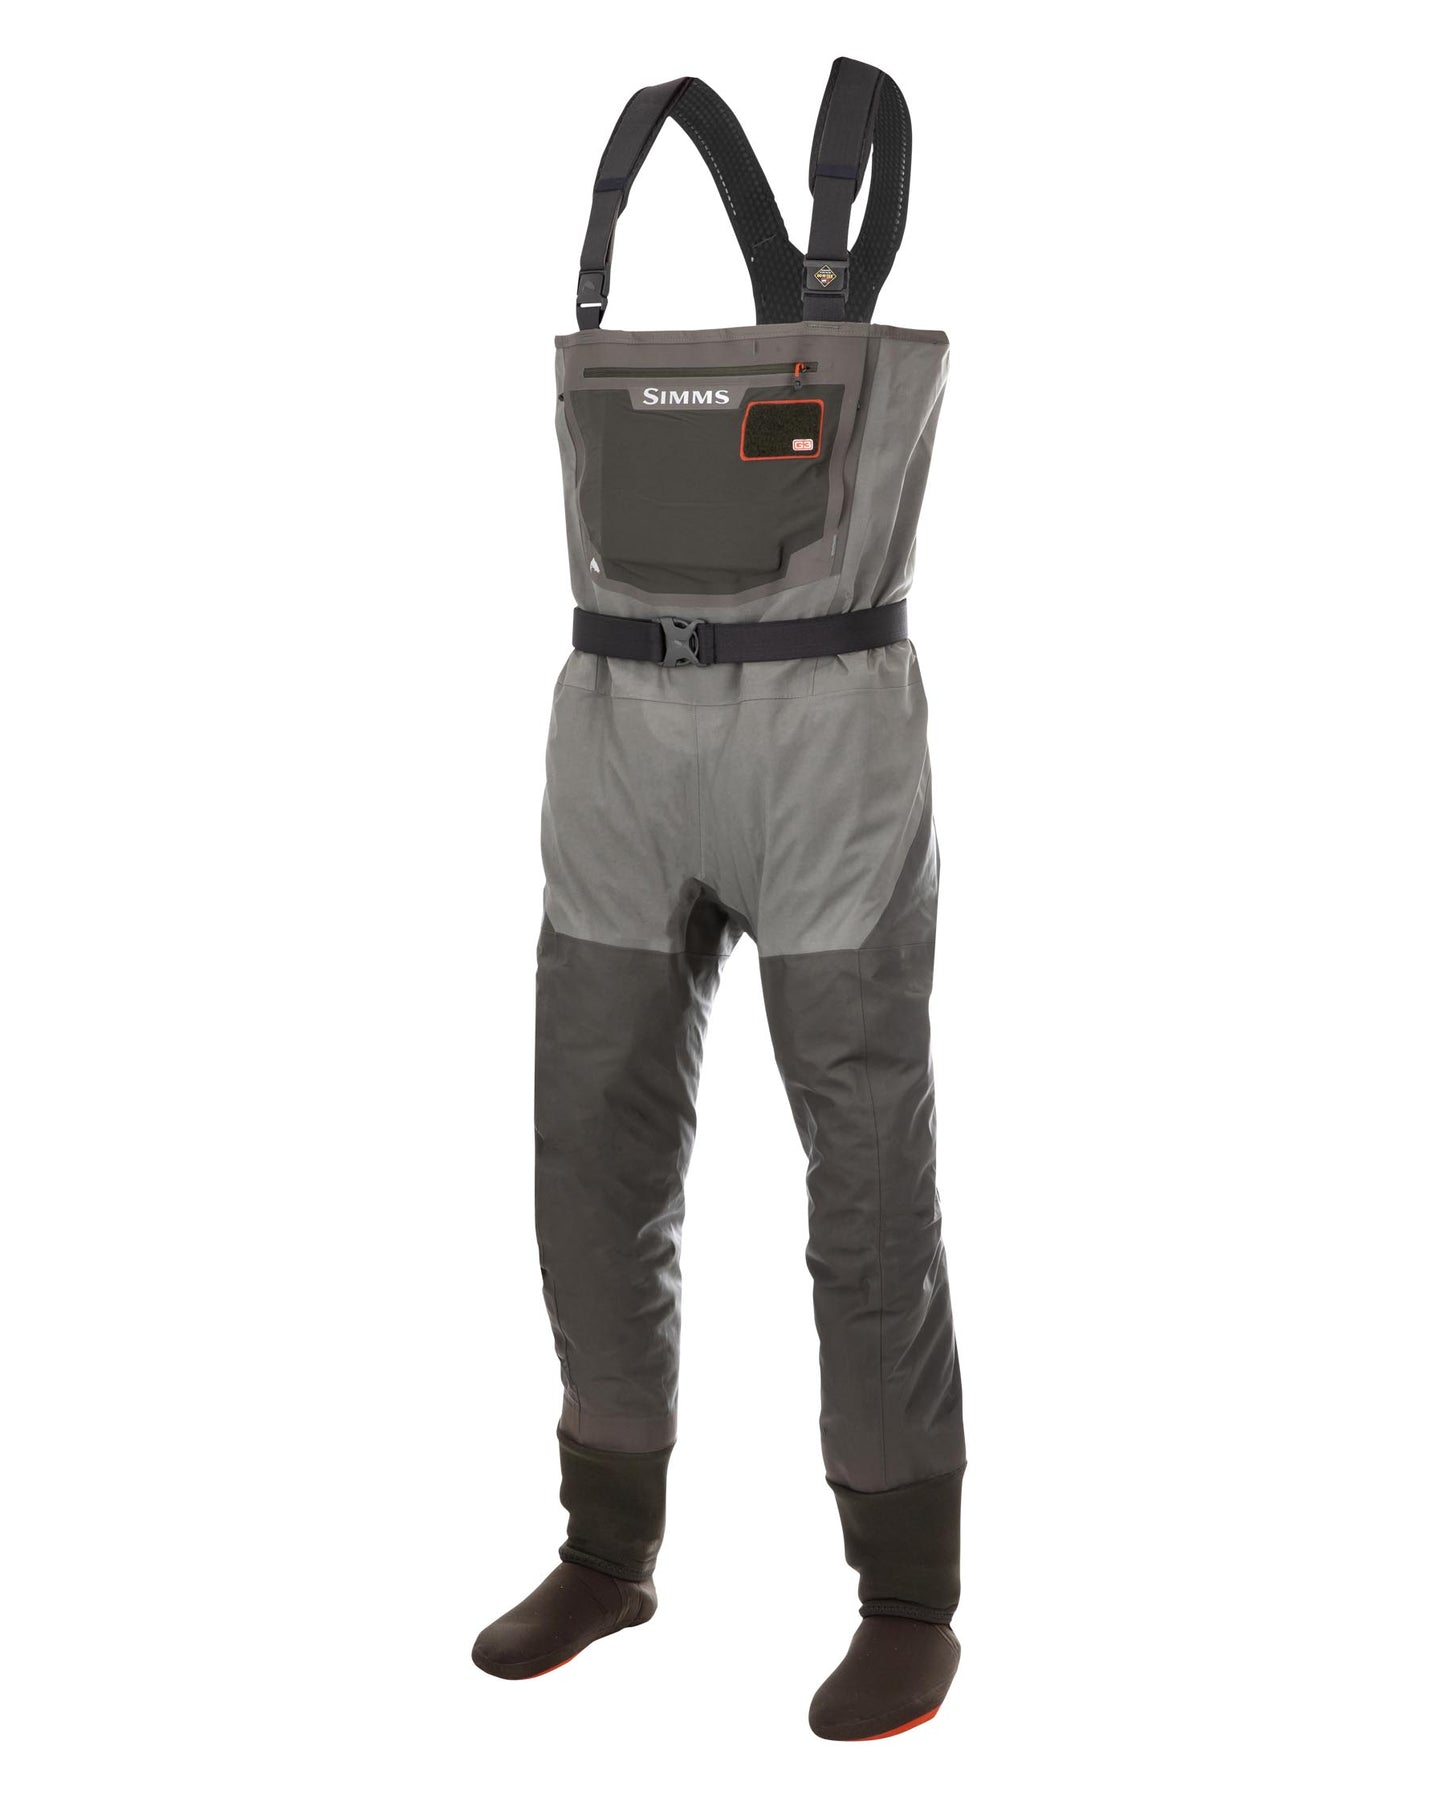 Men's Waterfowler Chest Waders - Man of stone